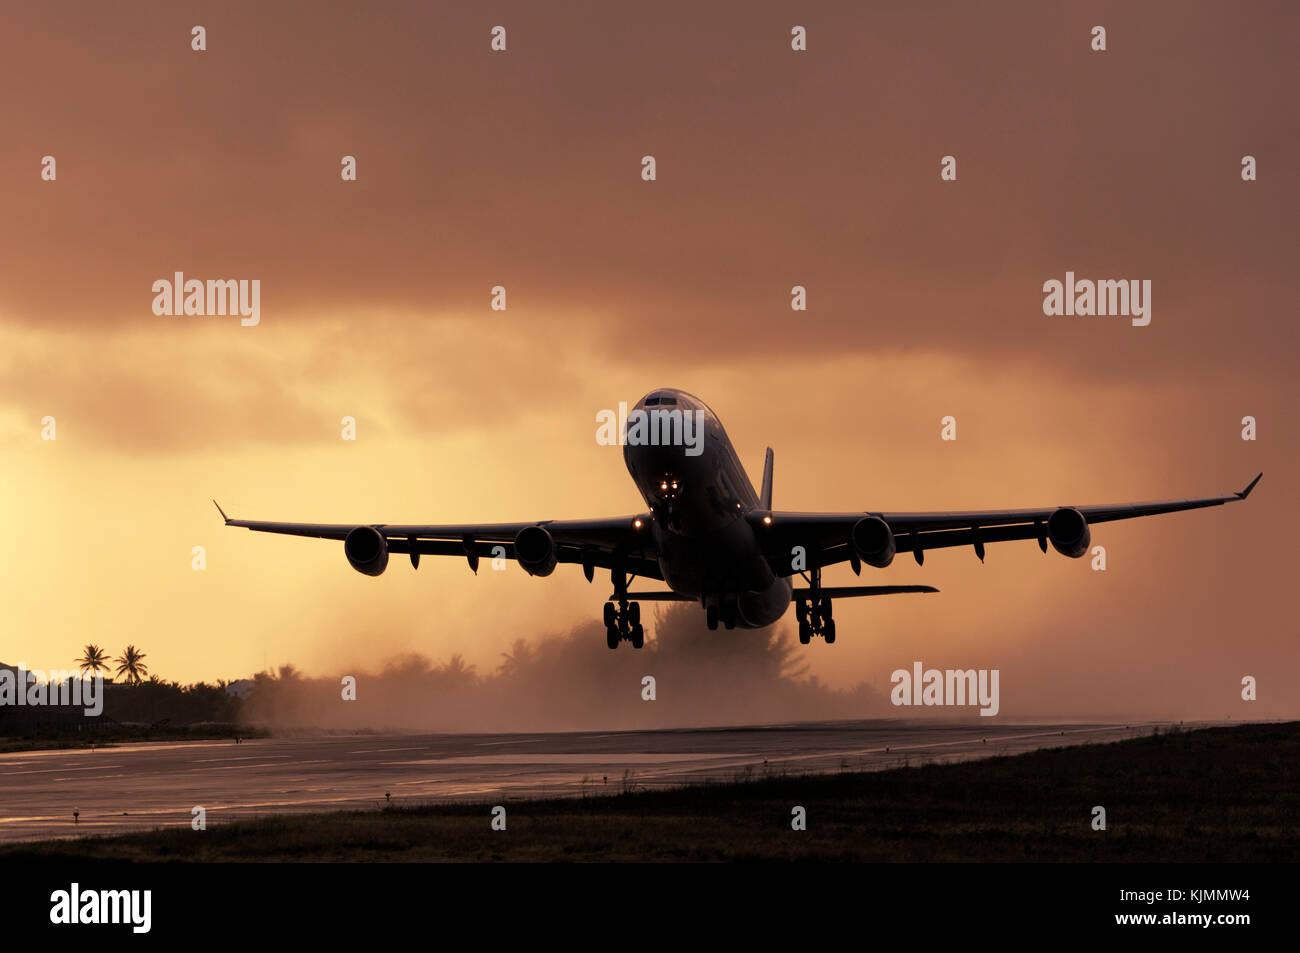 Airbus A340-313X take-off at dusk from a rainy wet runway with the engine exhaust making water spray Stock Photo